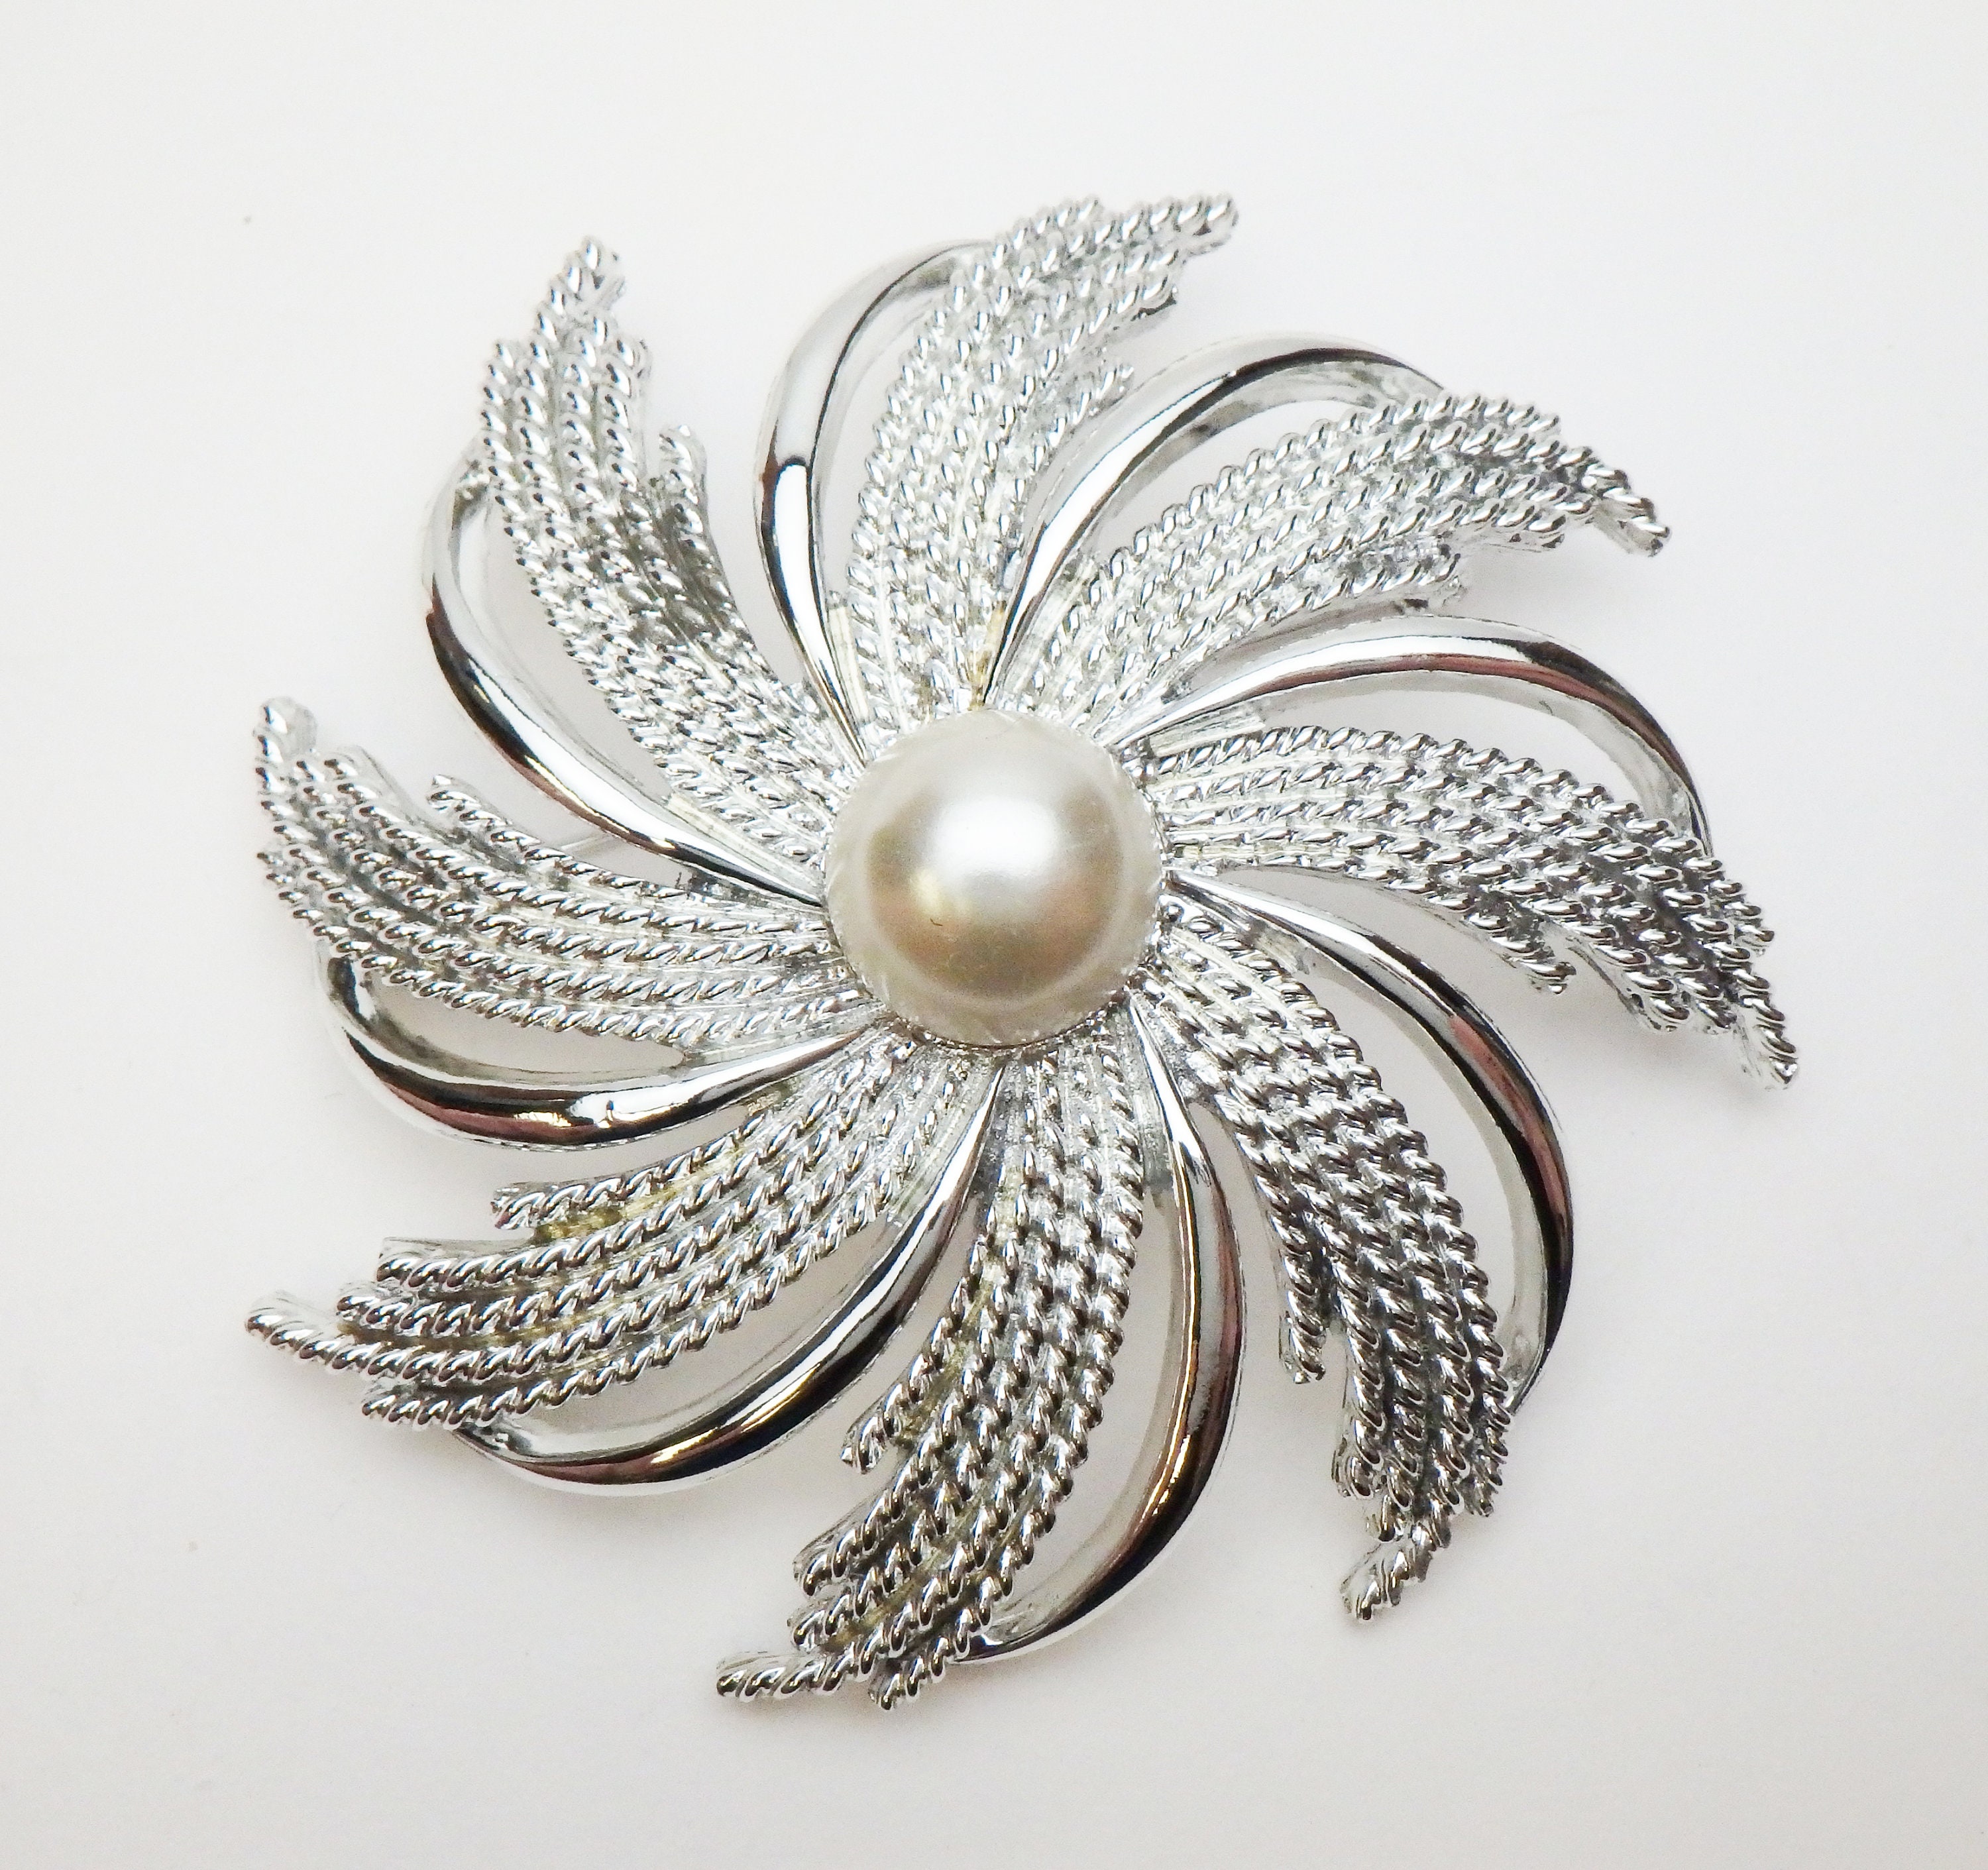 Vintage 1960s Sarah Coventry Silvery Starburst Brooch Silver Tone Metal Pinwheel with Faux Pearl Center